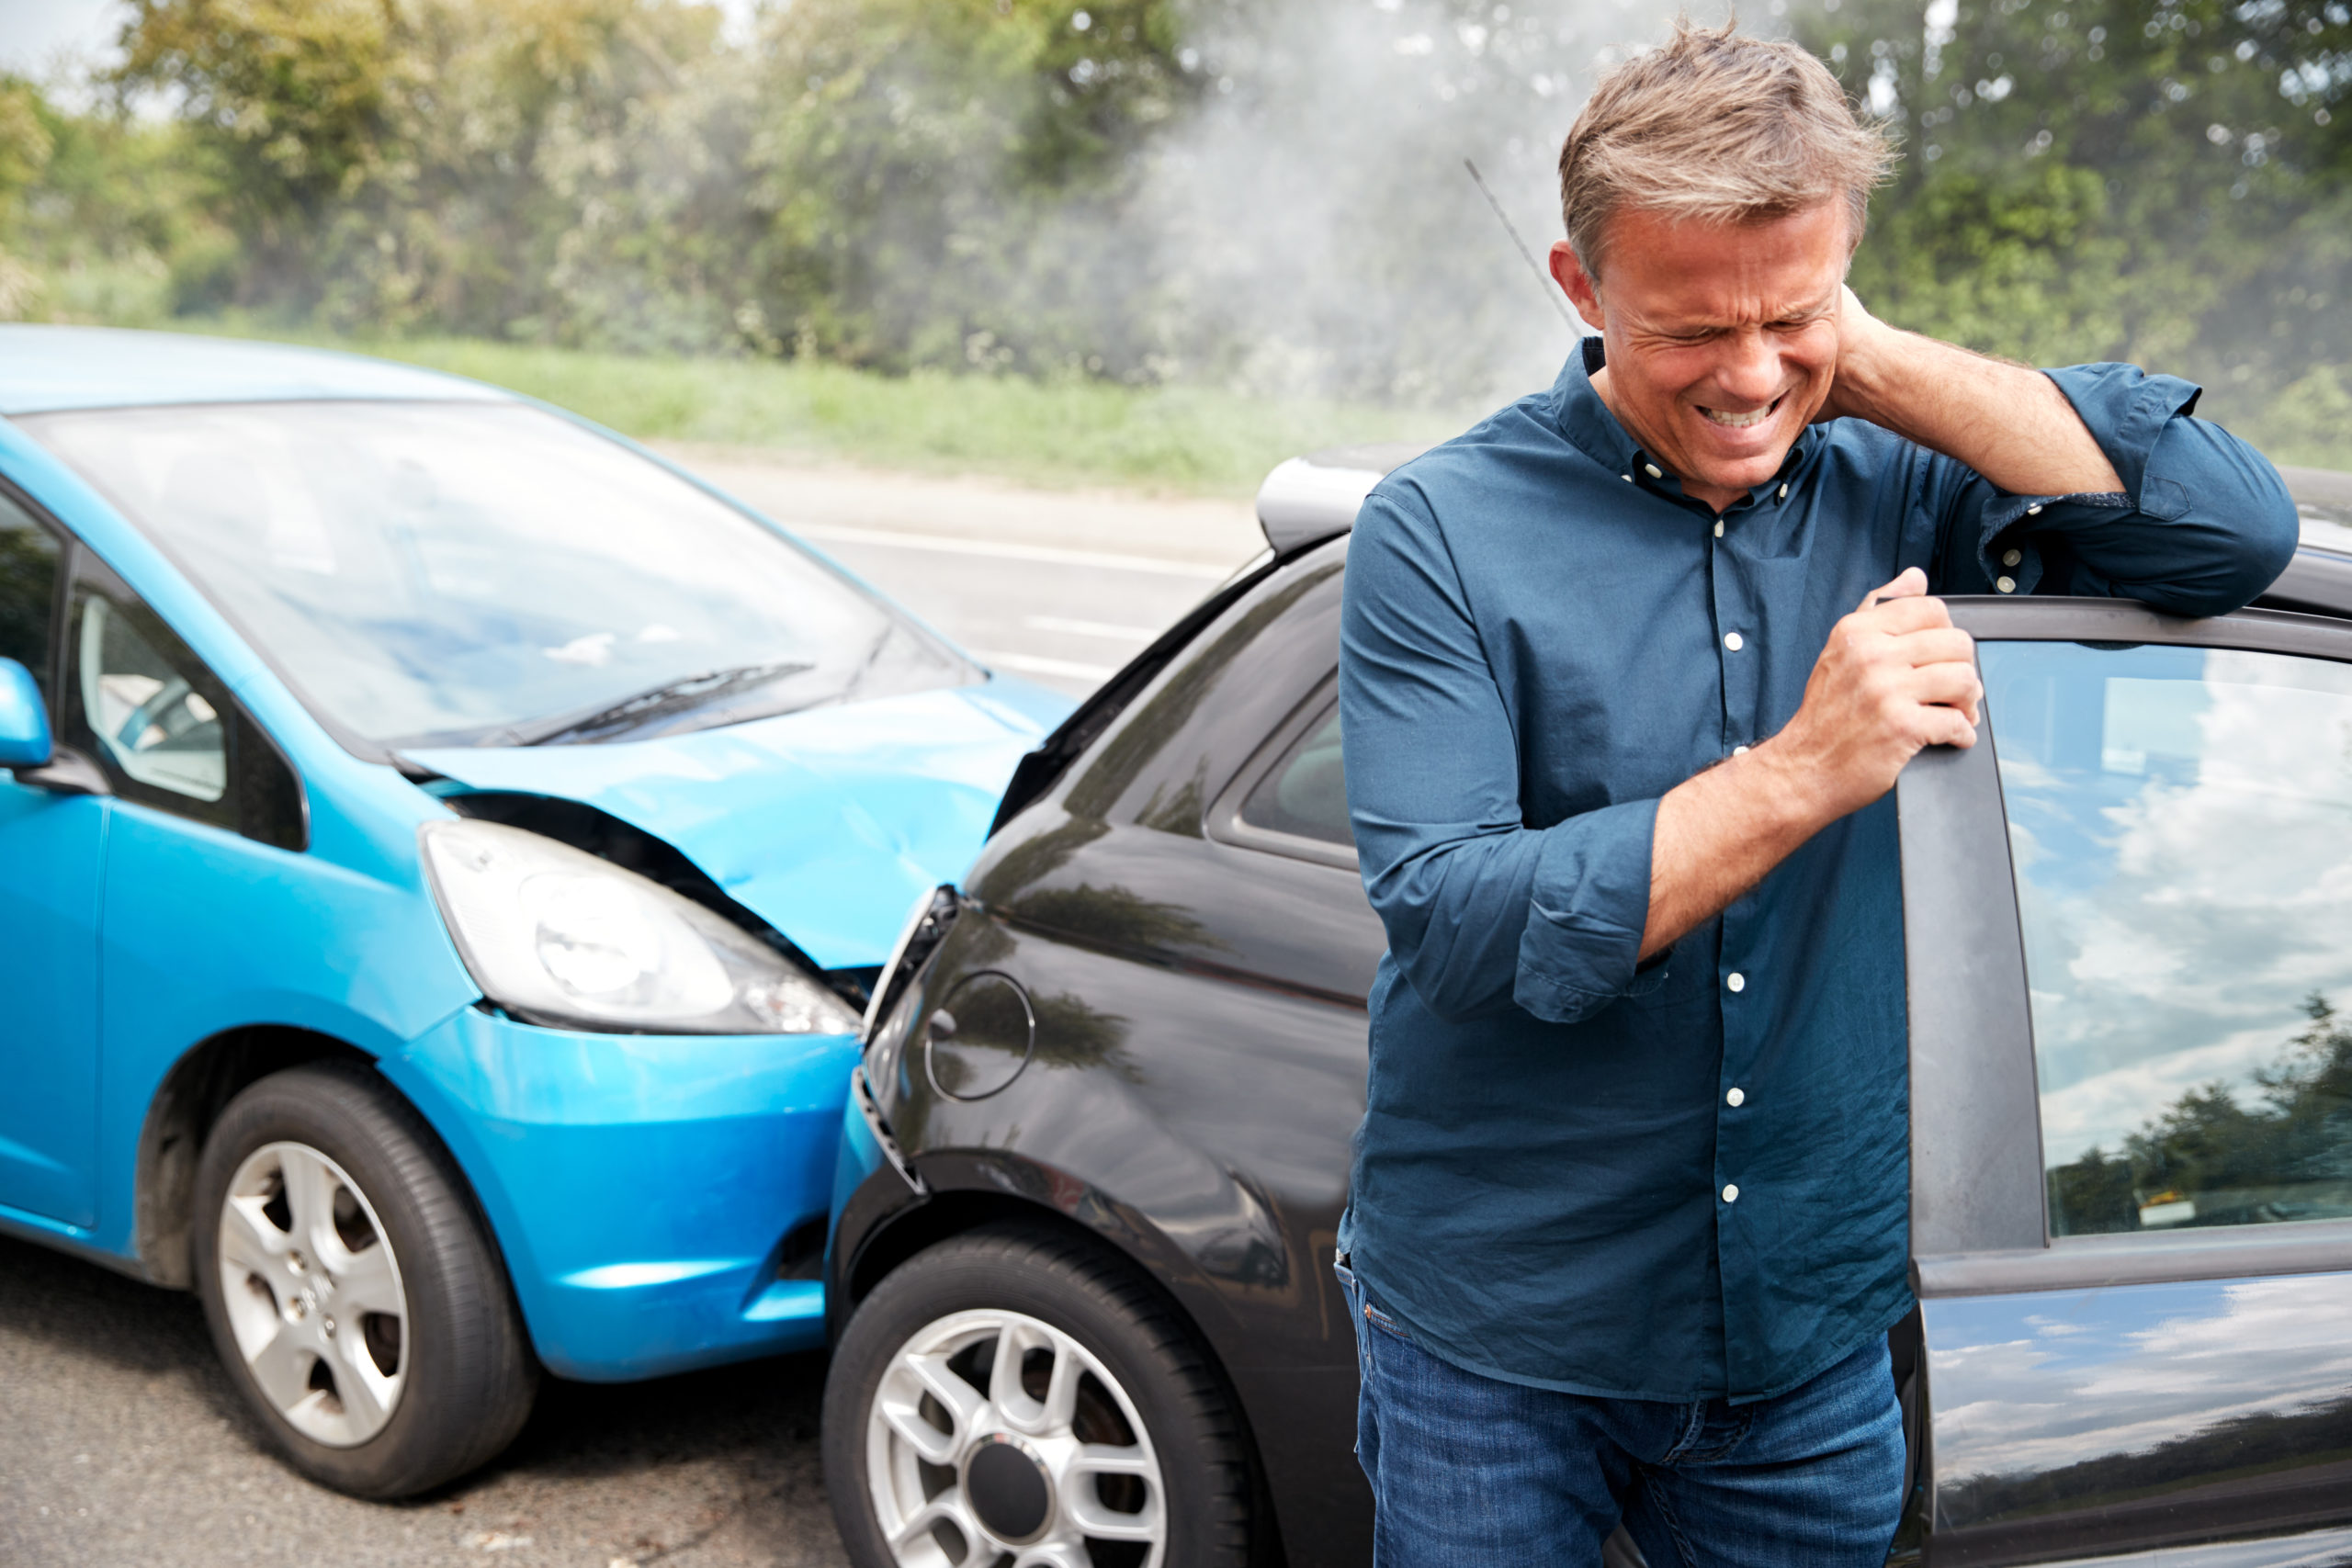 Can I Sue if I Get Whiplash from a Car Accident?